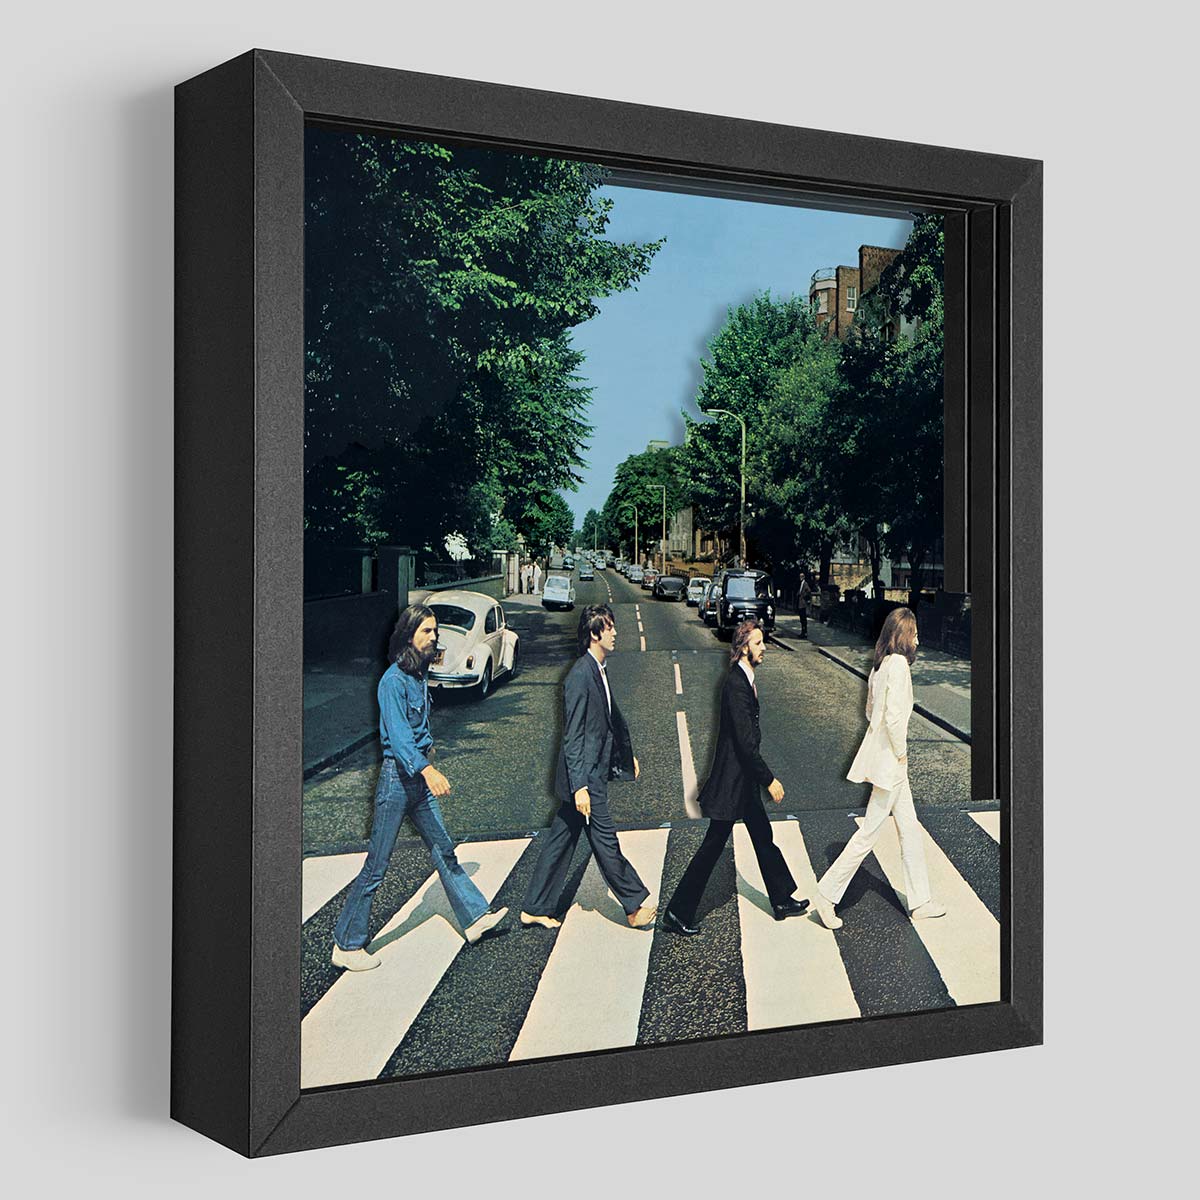 Beatles Art Director on Secrets of the 'Abbey Road' Cover